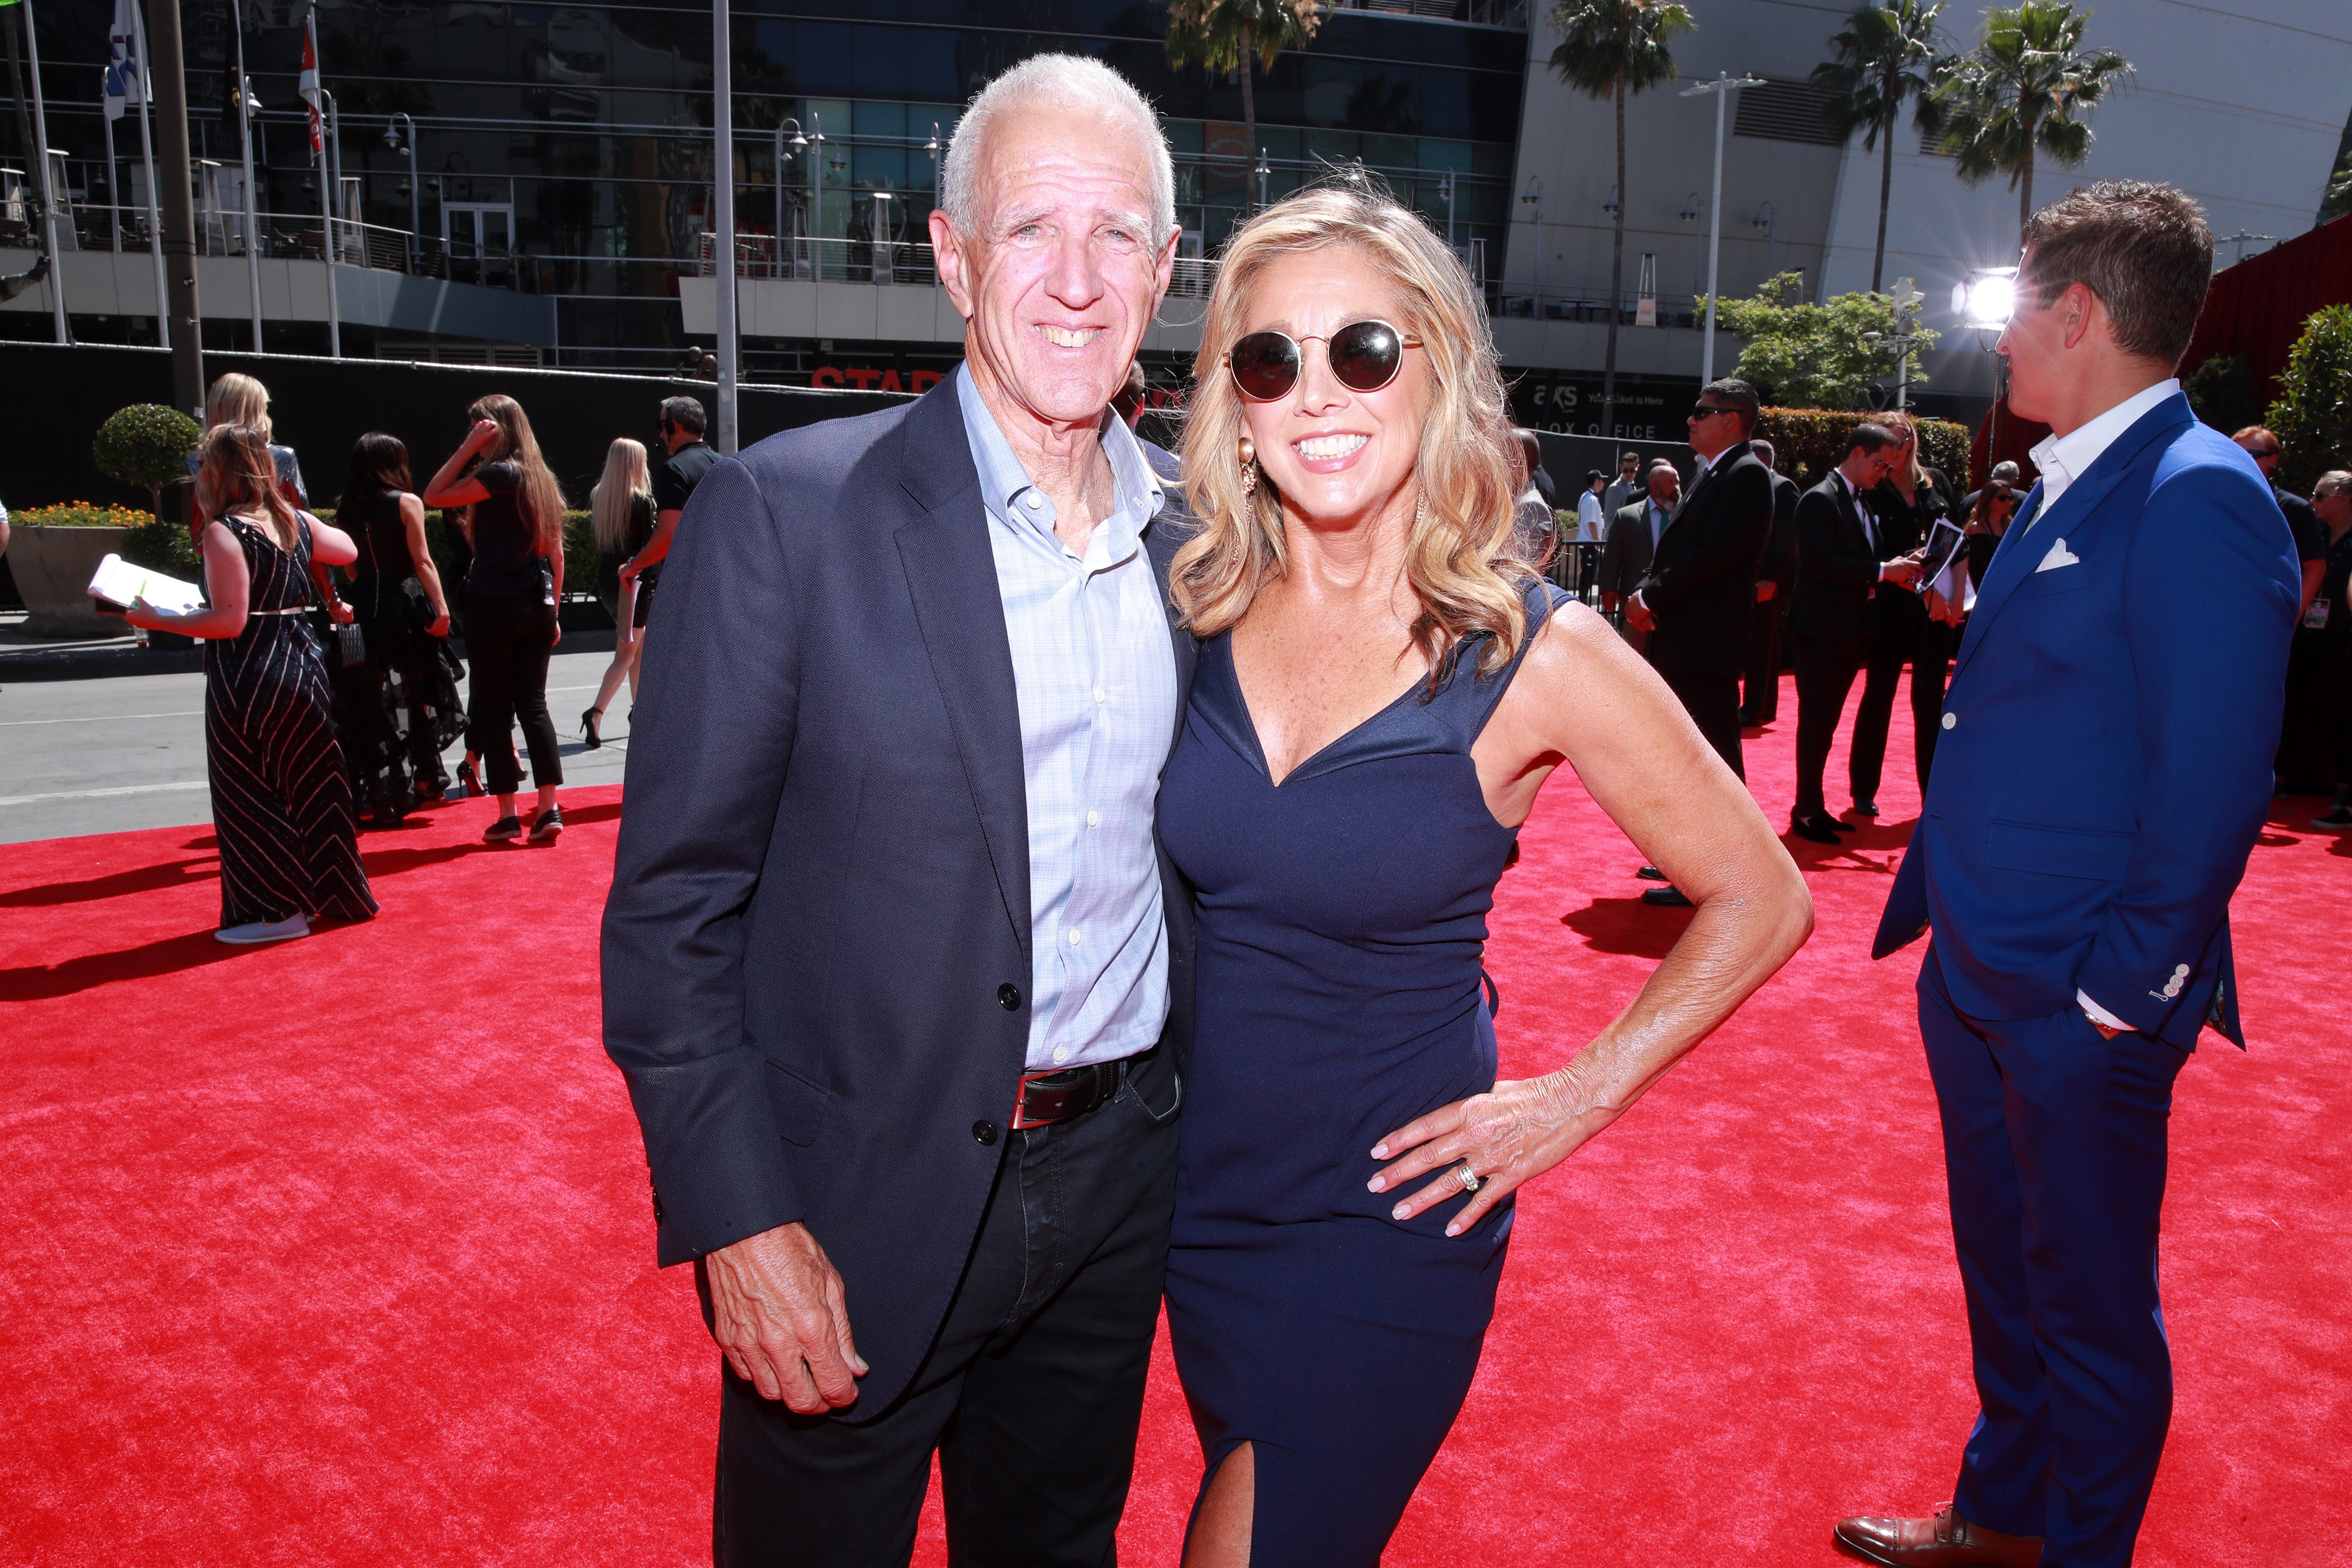 Jeff Austin and Denise Austin pose on the red carpet at The 2019 ESPYs at Microsoft Theater on July 10, 2019, in Los Angeles, California | Source: Source: Getty Images